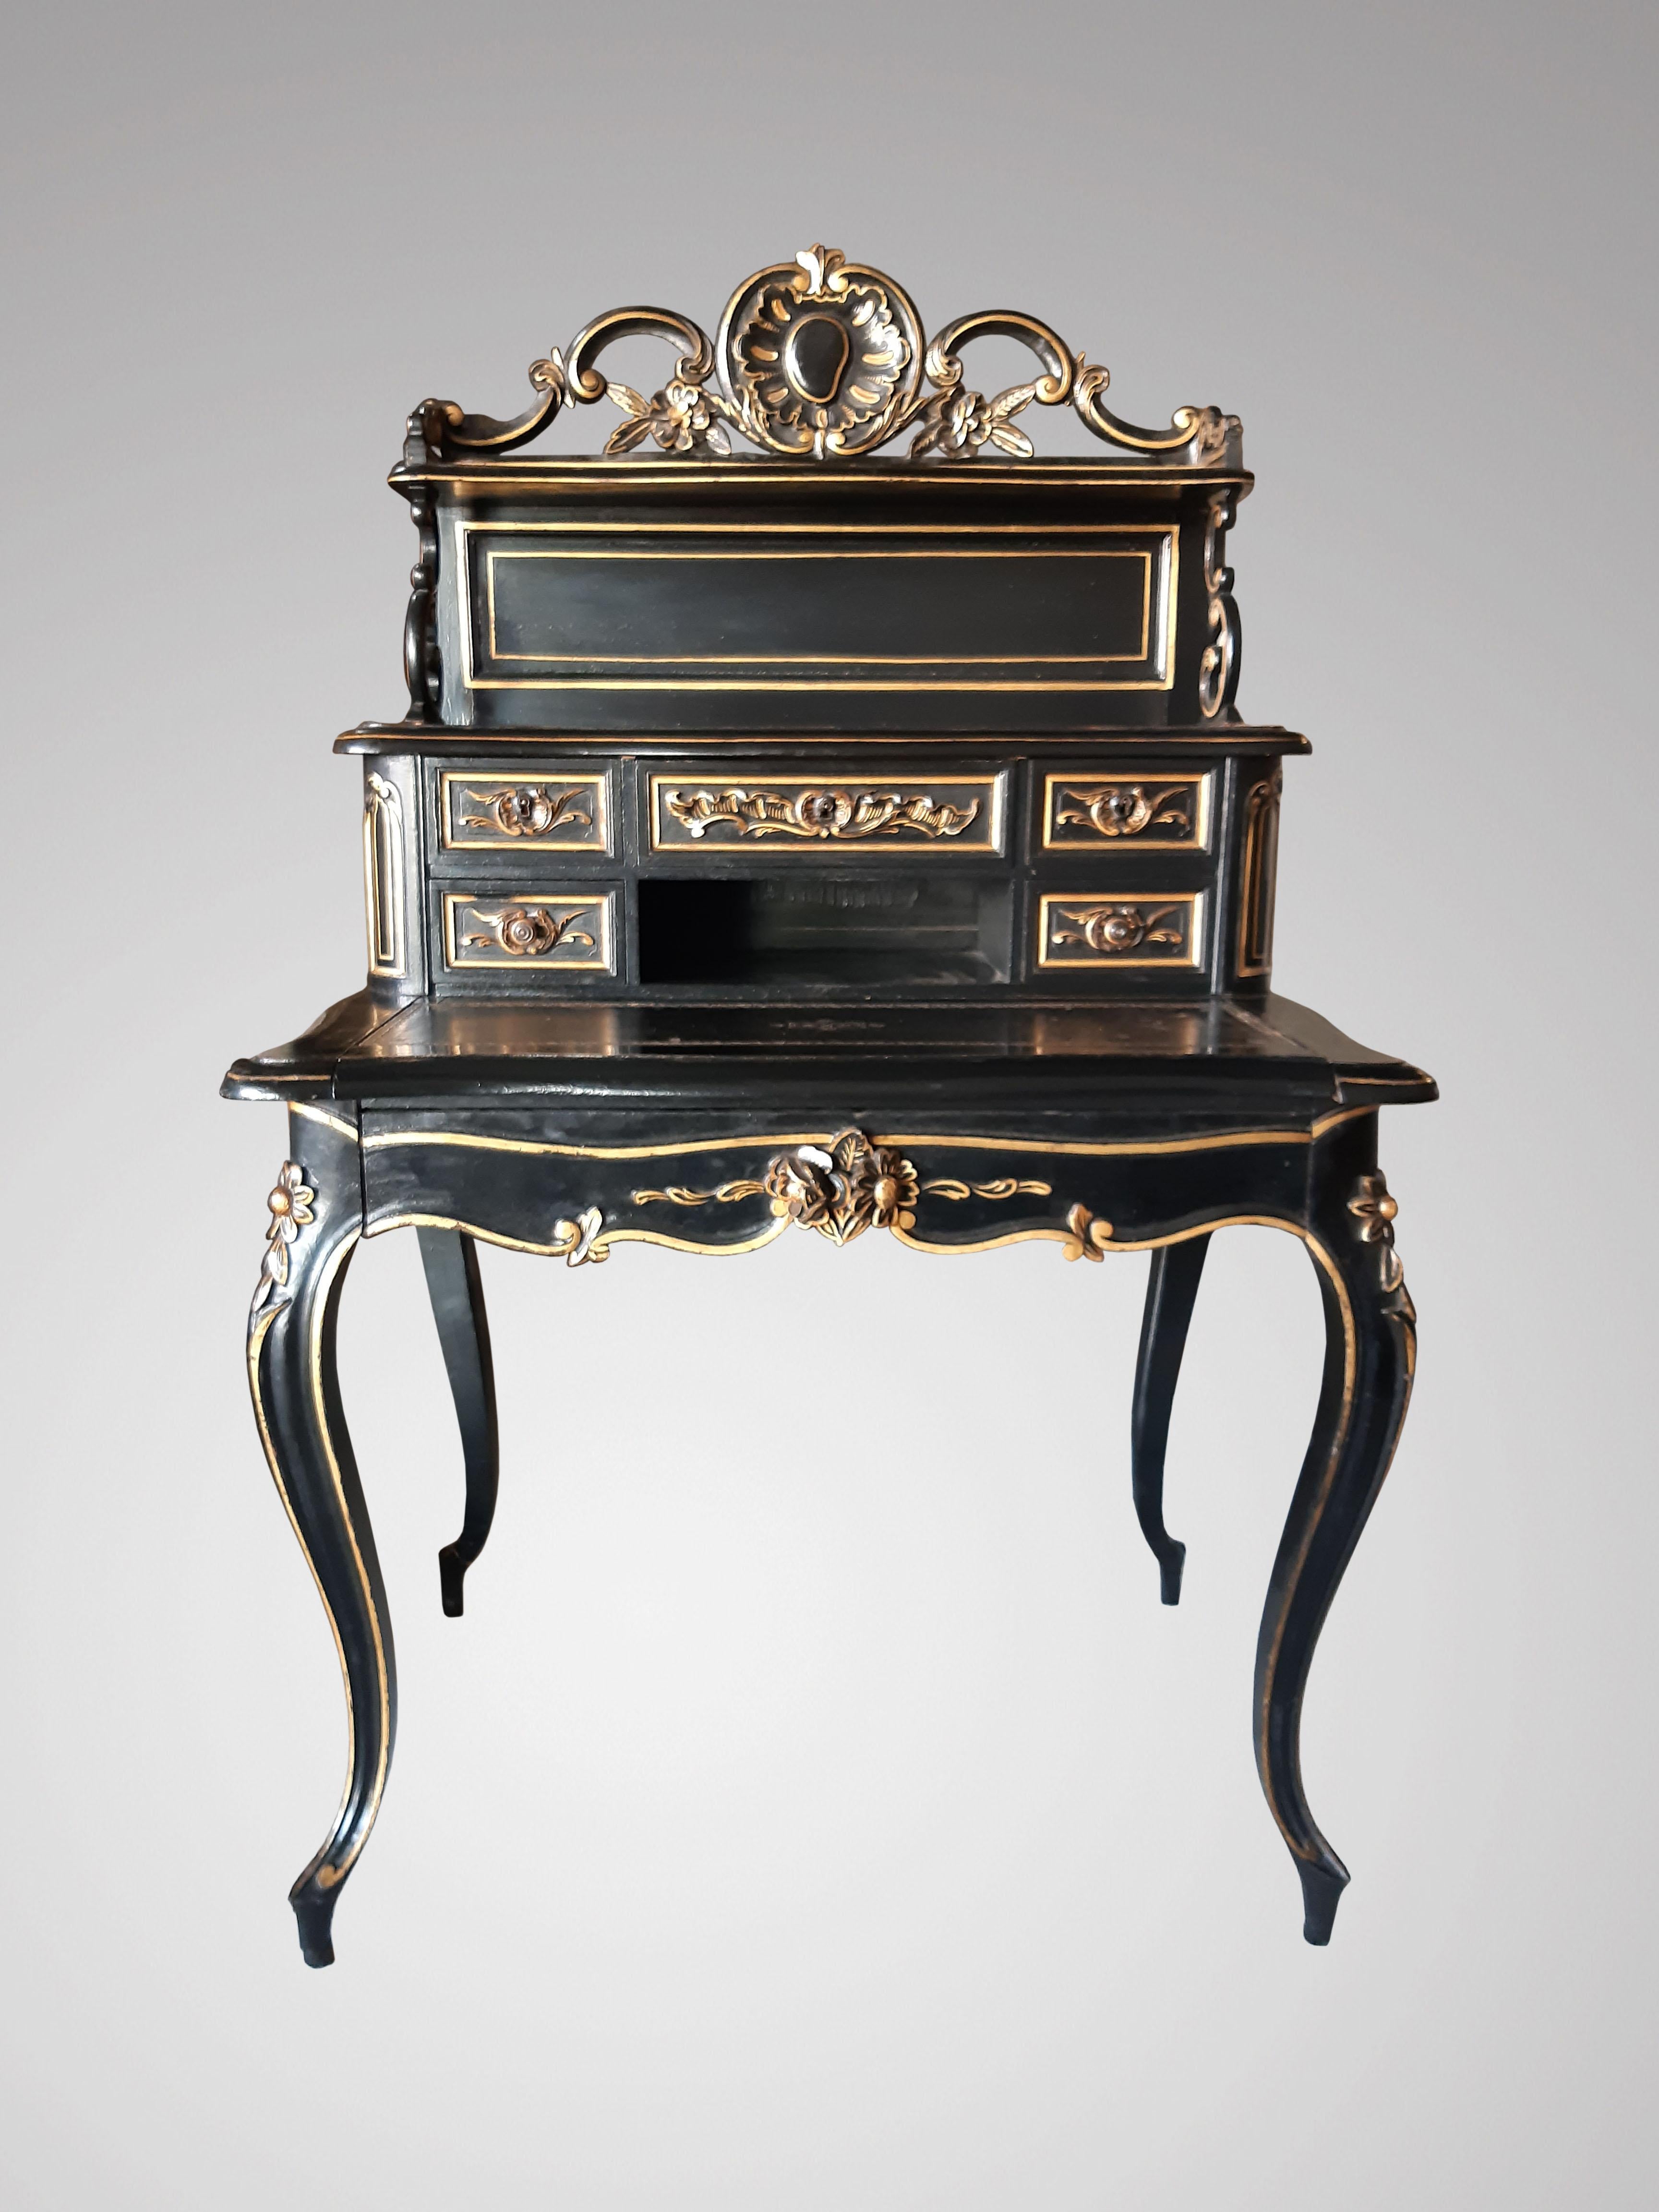 French Secretaire Happiness of the Day Small Black Desk Napoleon III french antiquity